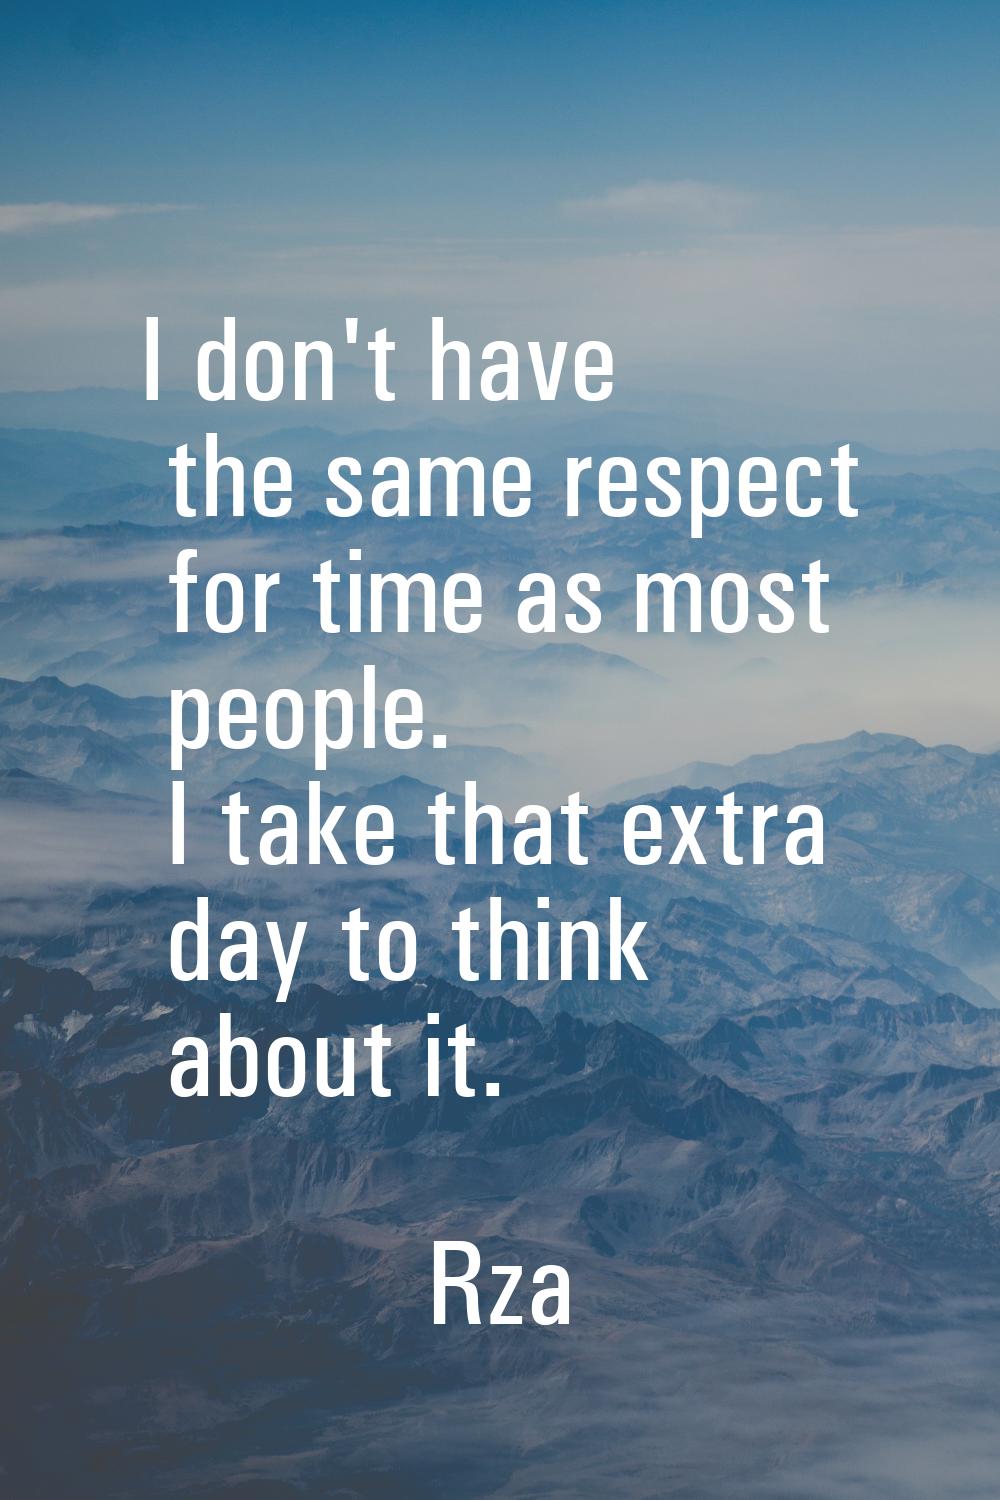 I don't have the same respect for time as most people. I take that extra day to think about it.